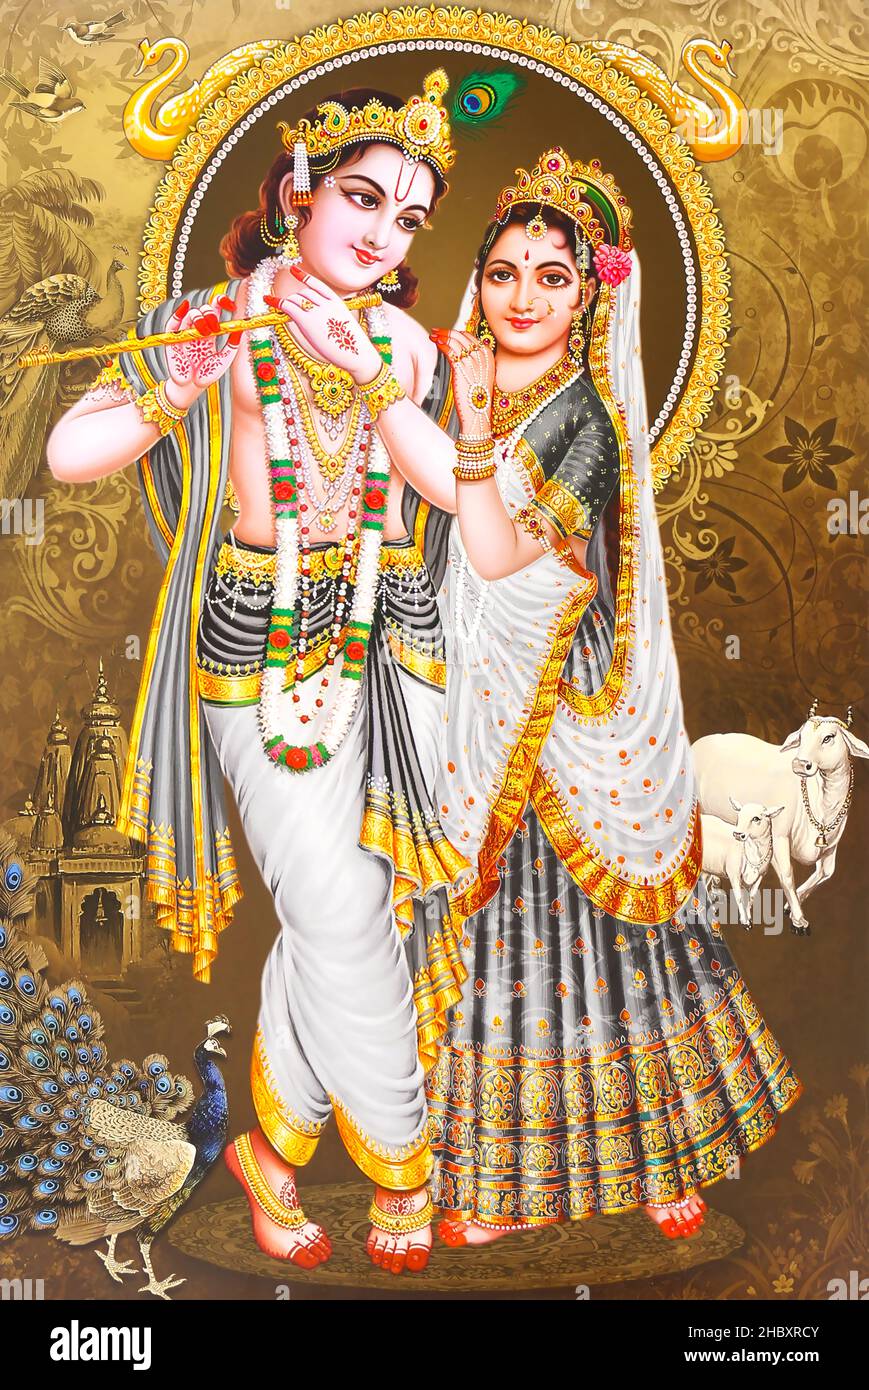 Illustration design of Lord Krishna playing flute with Radha Background Stock Photo